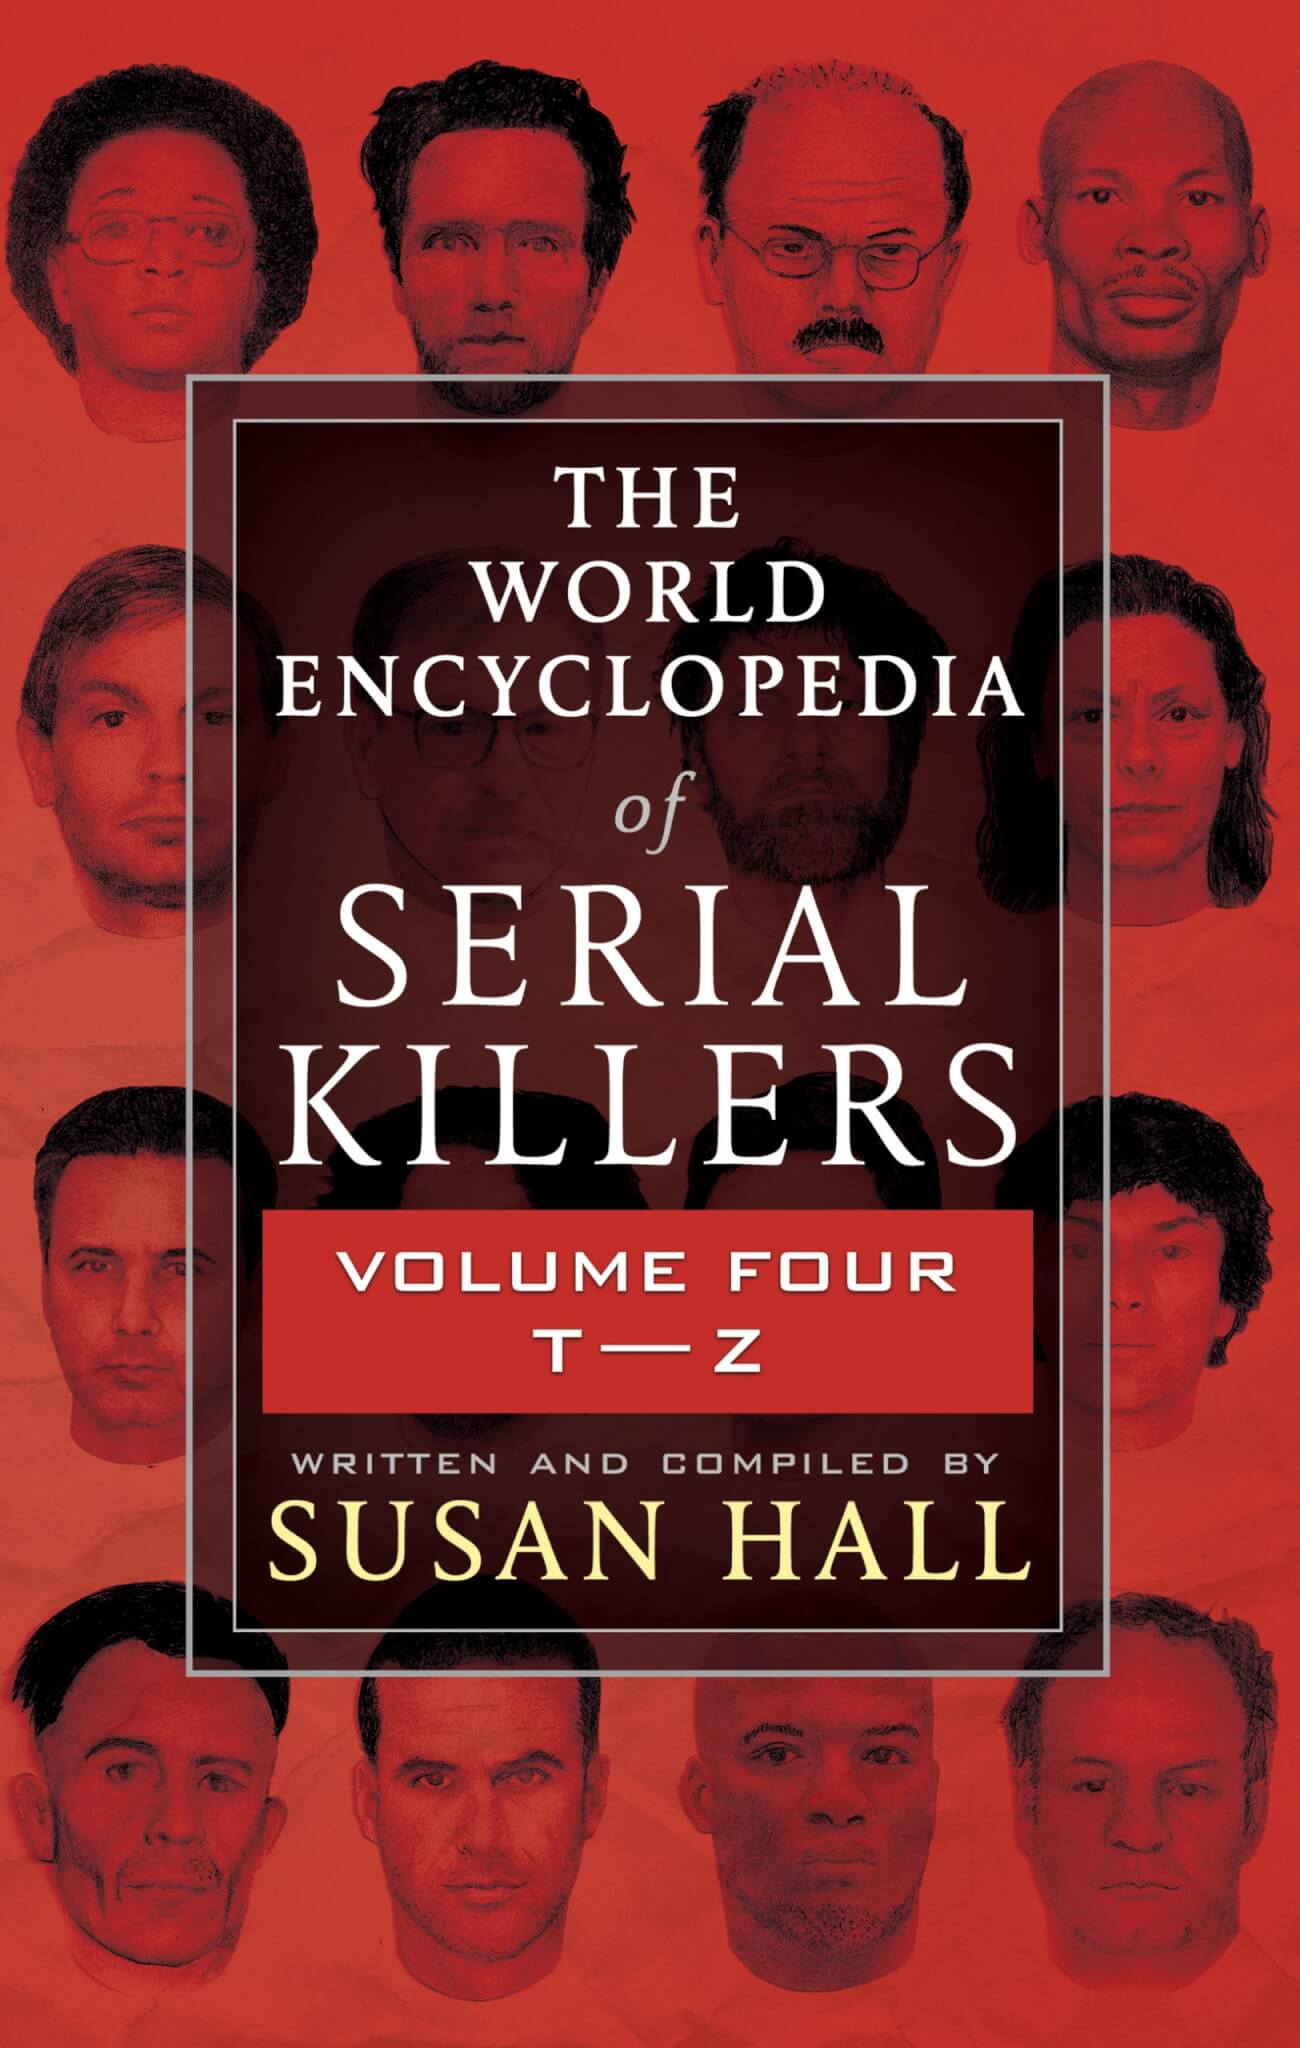 The World Encyclopedia Of Serial Killers Volume Four:  eBooks Available